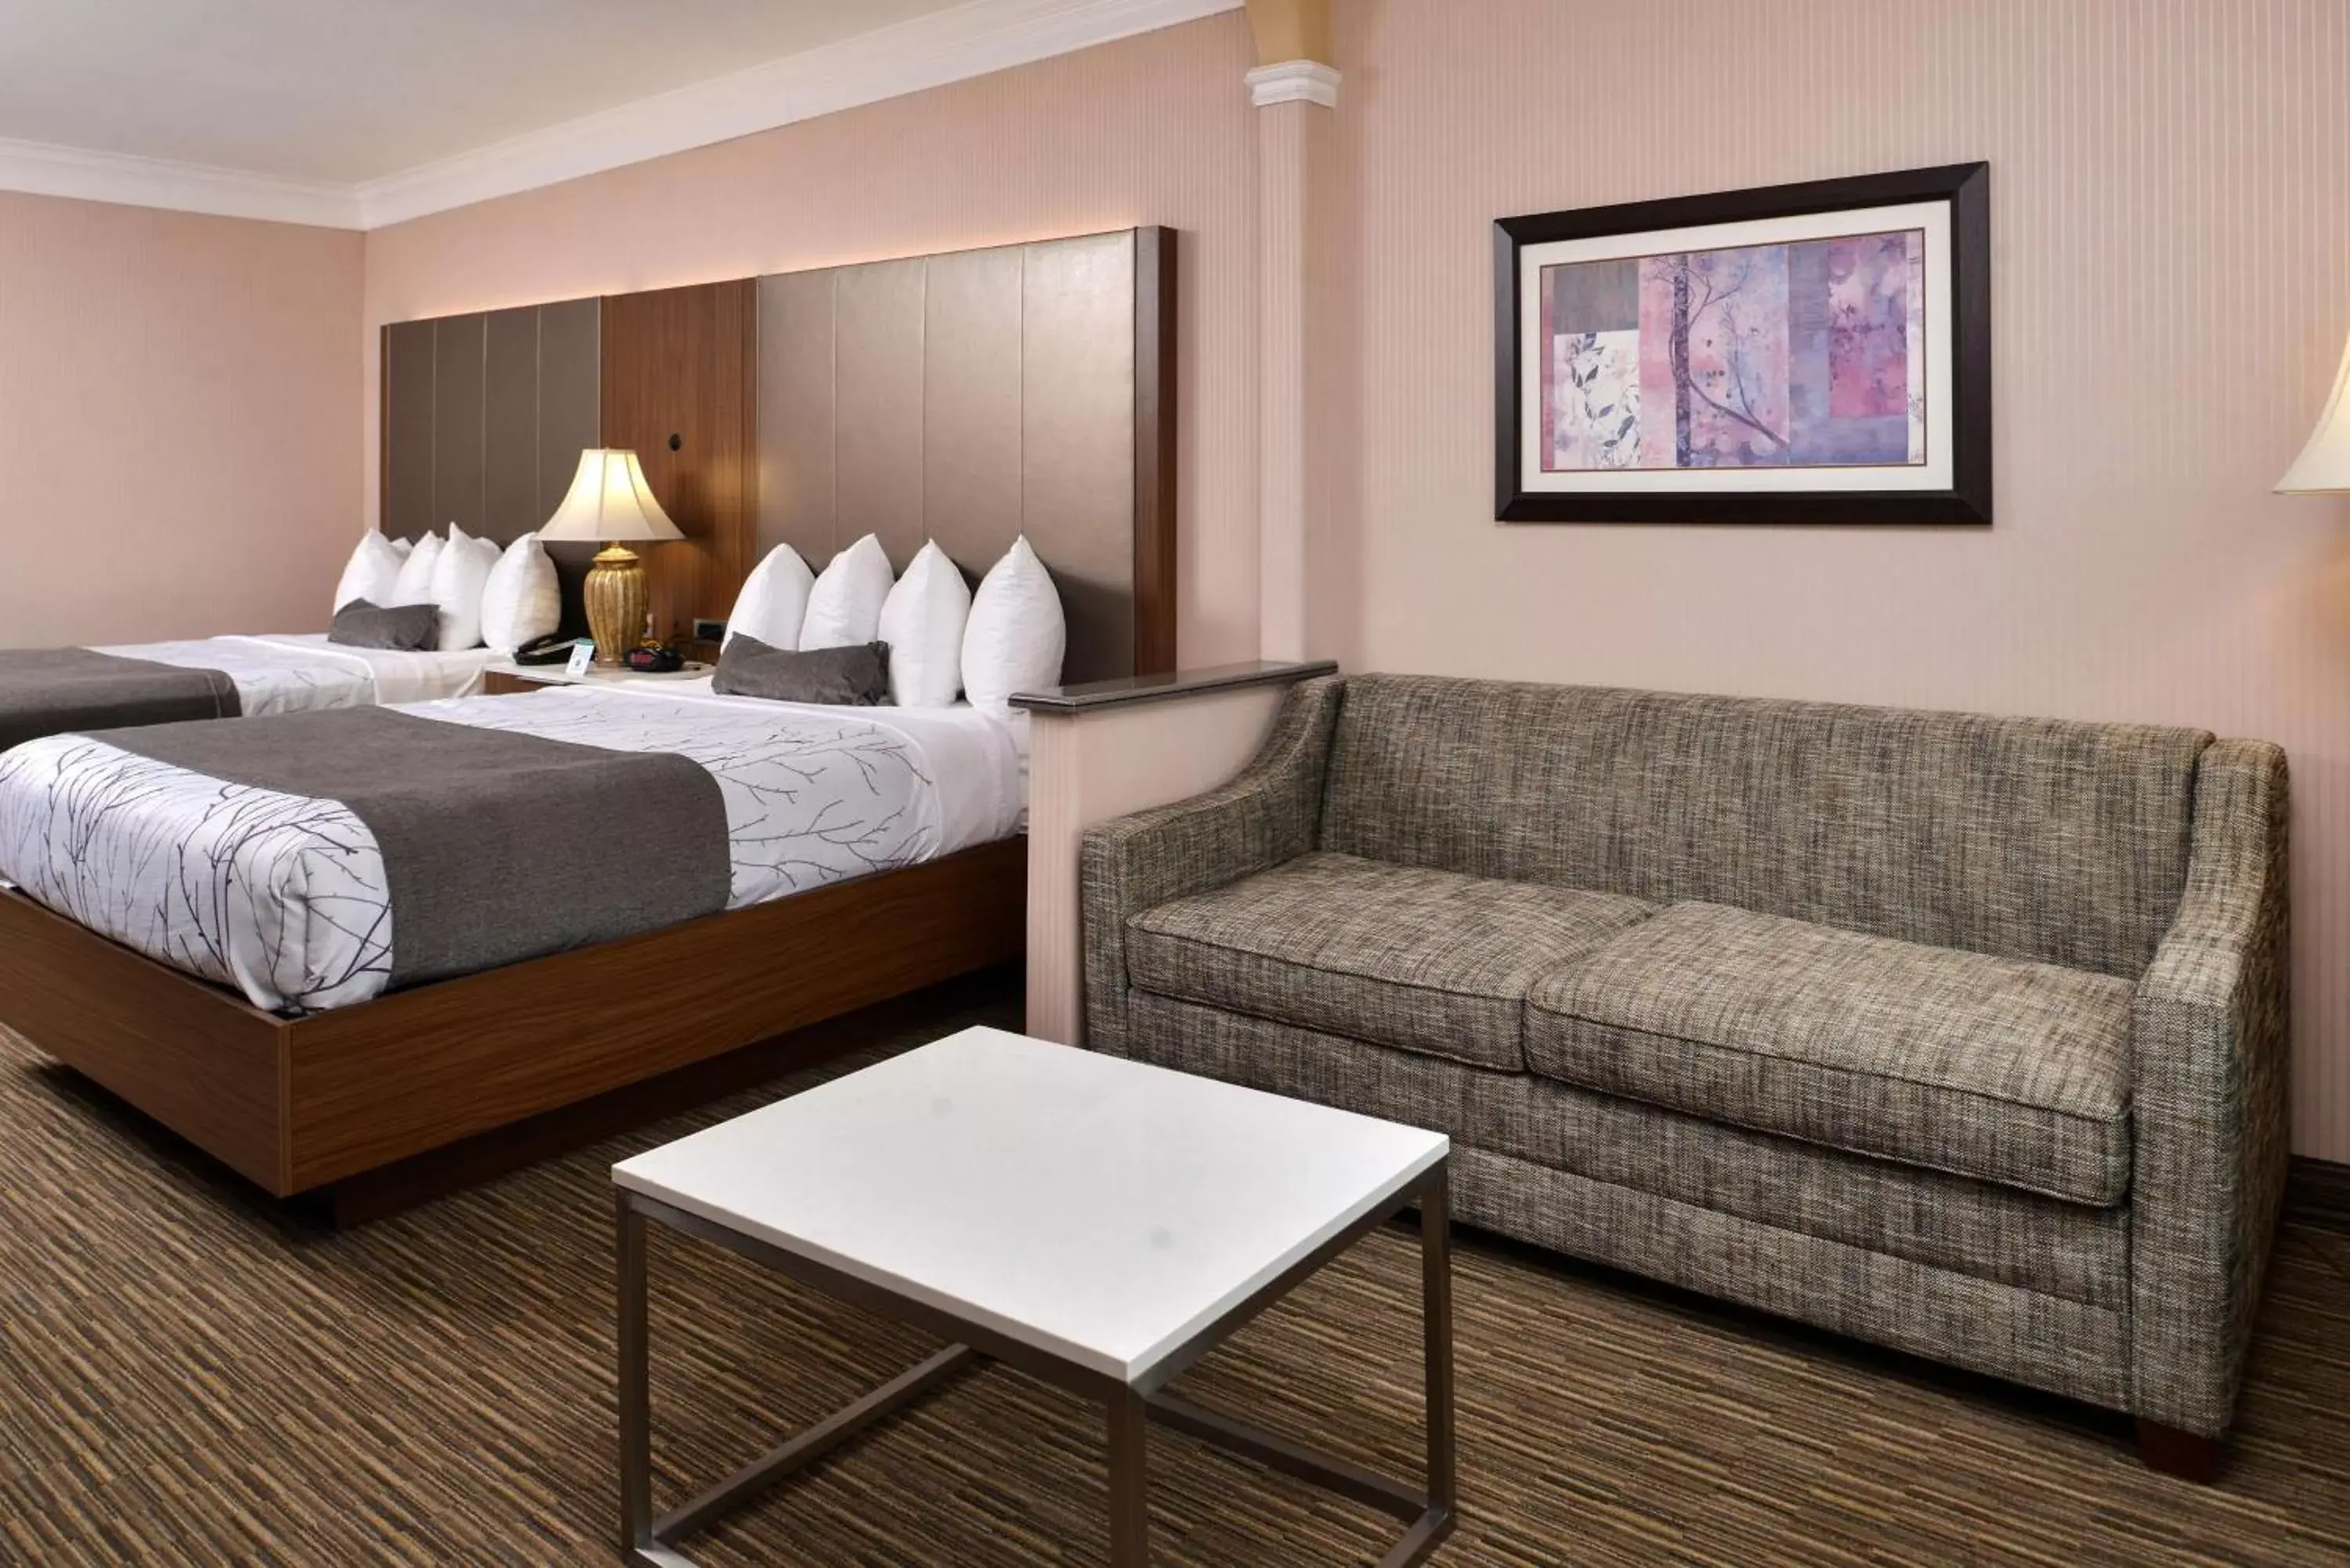 Photo of the whole room in Best Western Plus Suites Hotel - Los Angeles LAX Airport